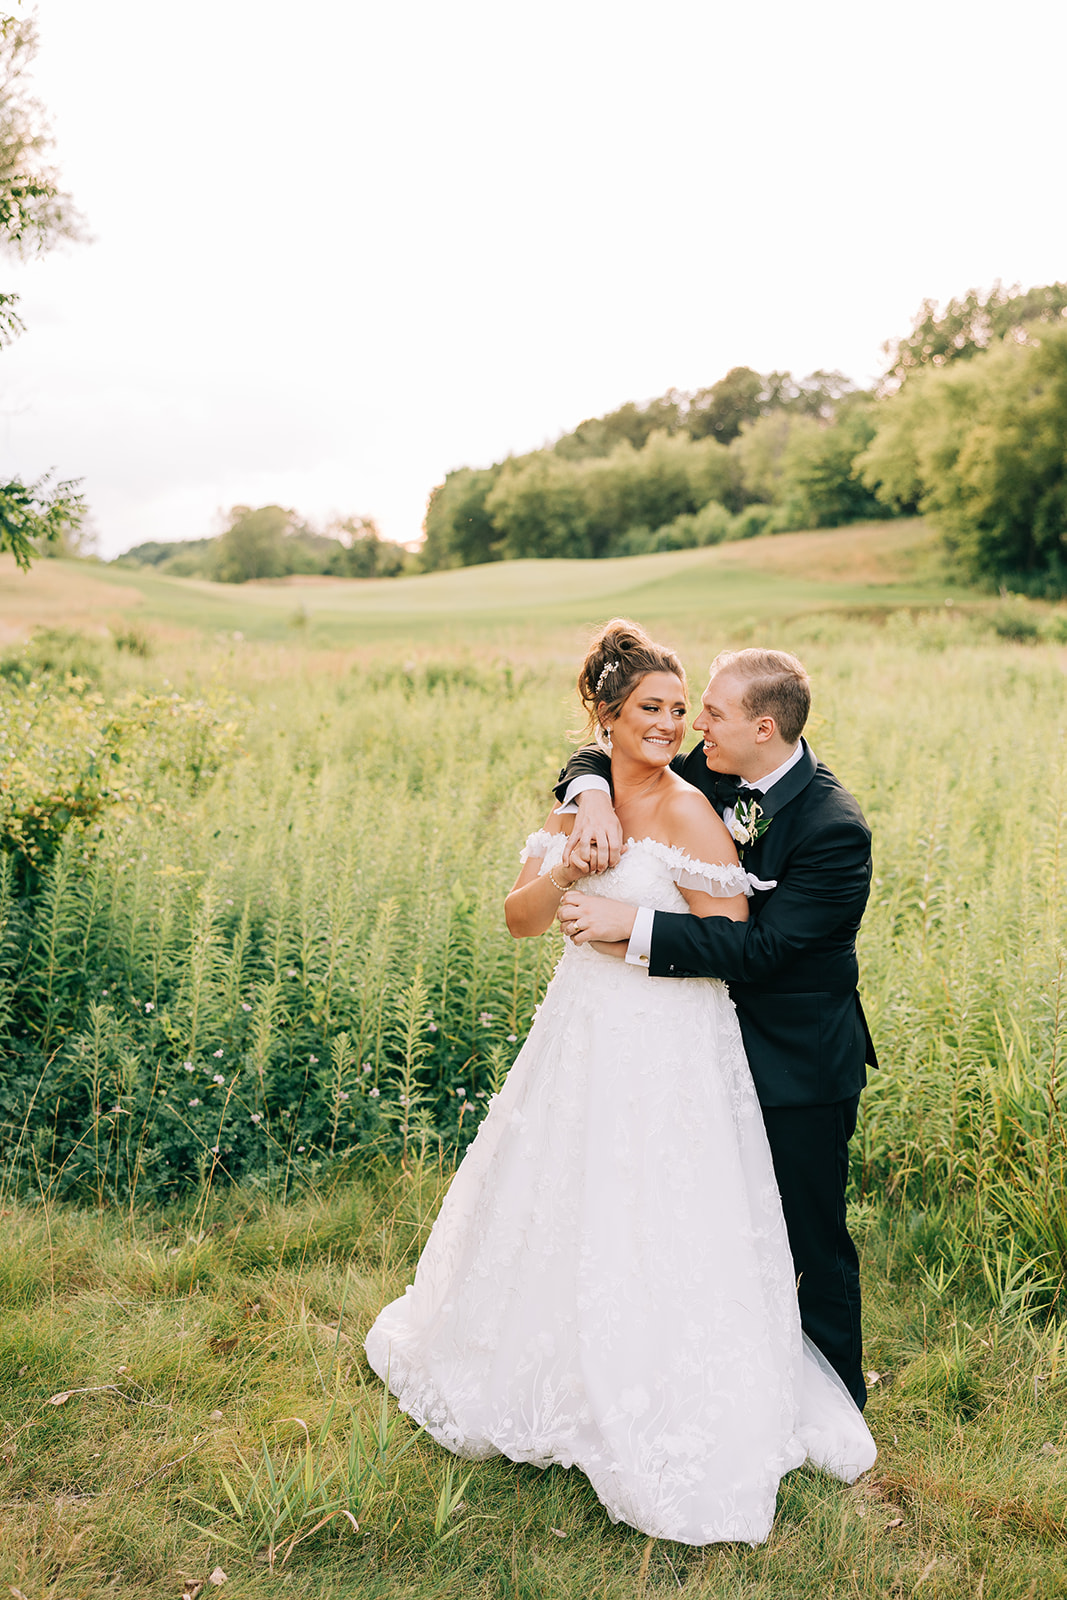 SUMMER WEDDING AT CARRIAGE HOUSE LAC LA BELLE